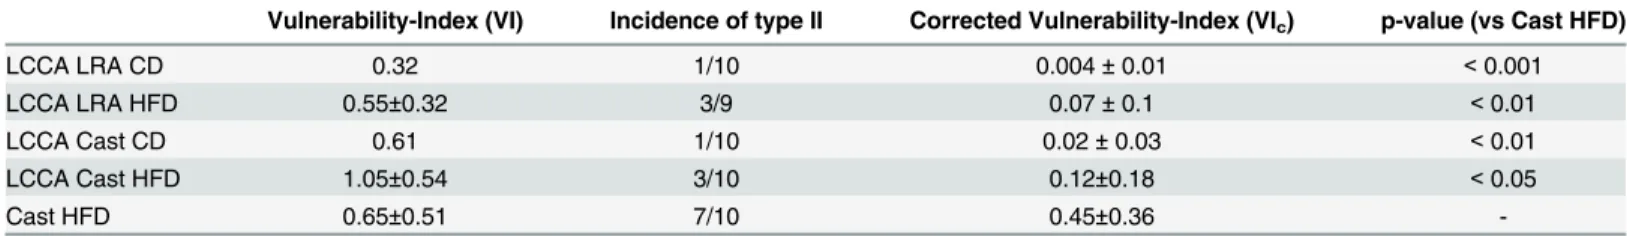 Table 1. Vulnerability-Index of the lesions in the mouse models of atherosclerotic plaque destabilization.